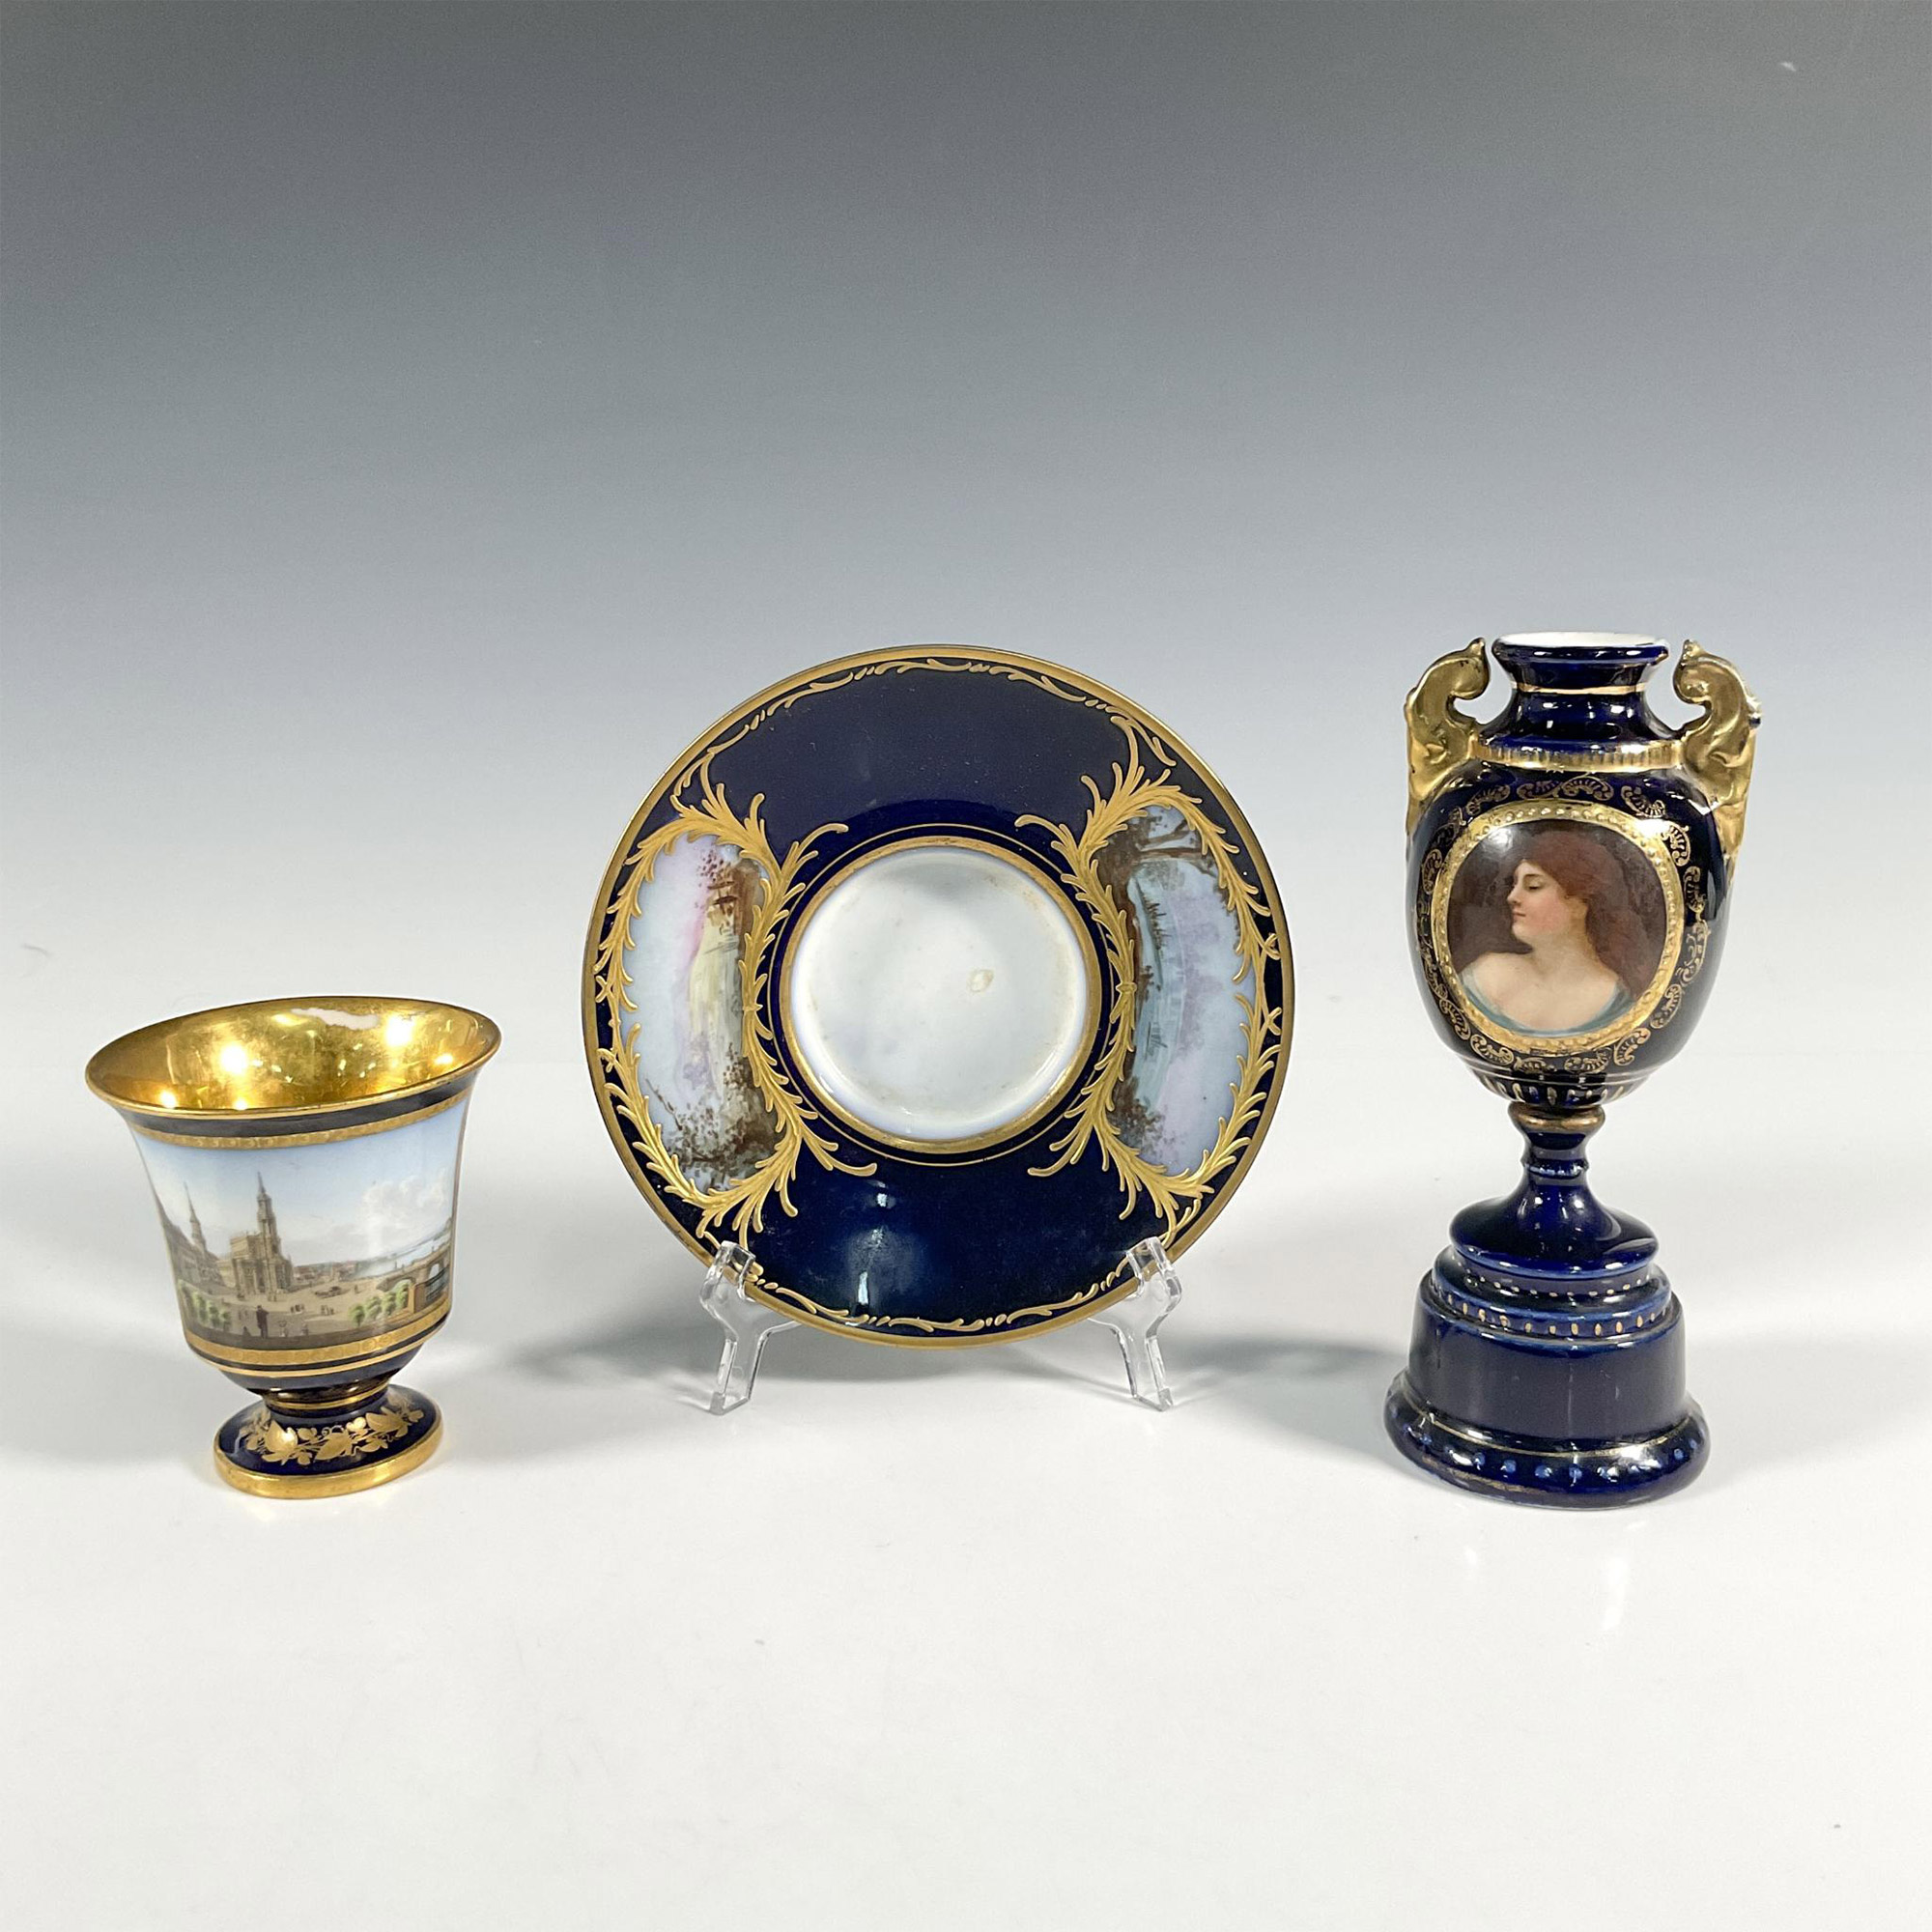 3pc European Porcelain Cup, Saucer, and Vase - Image 3 of 4